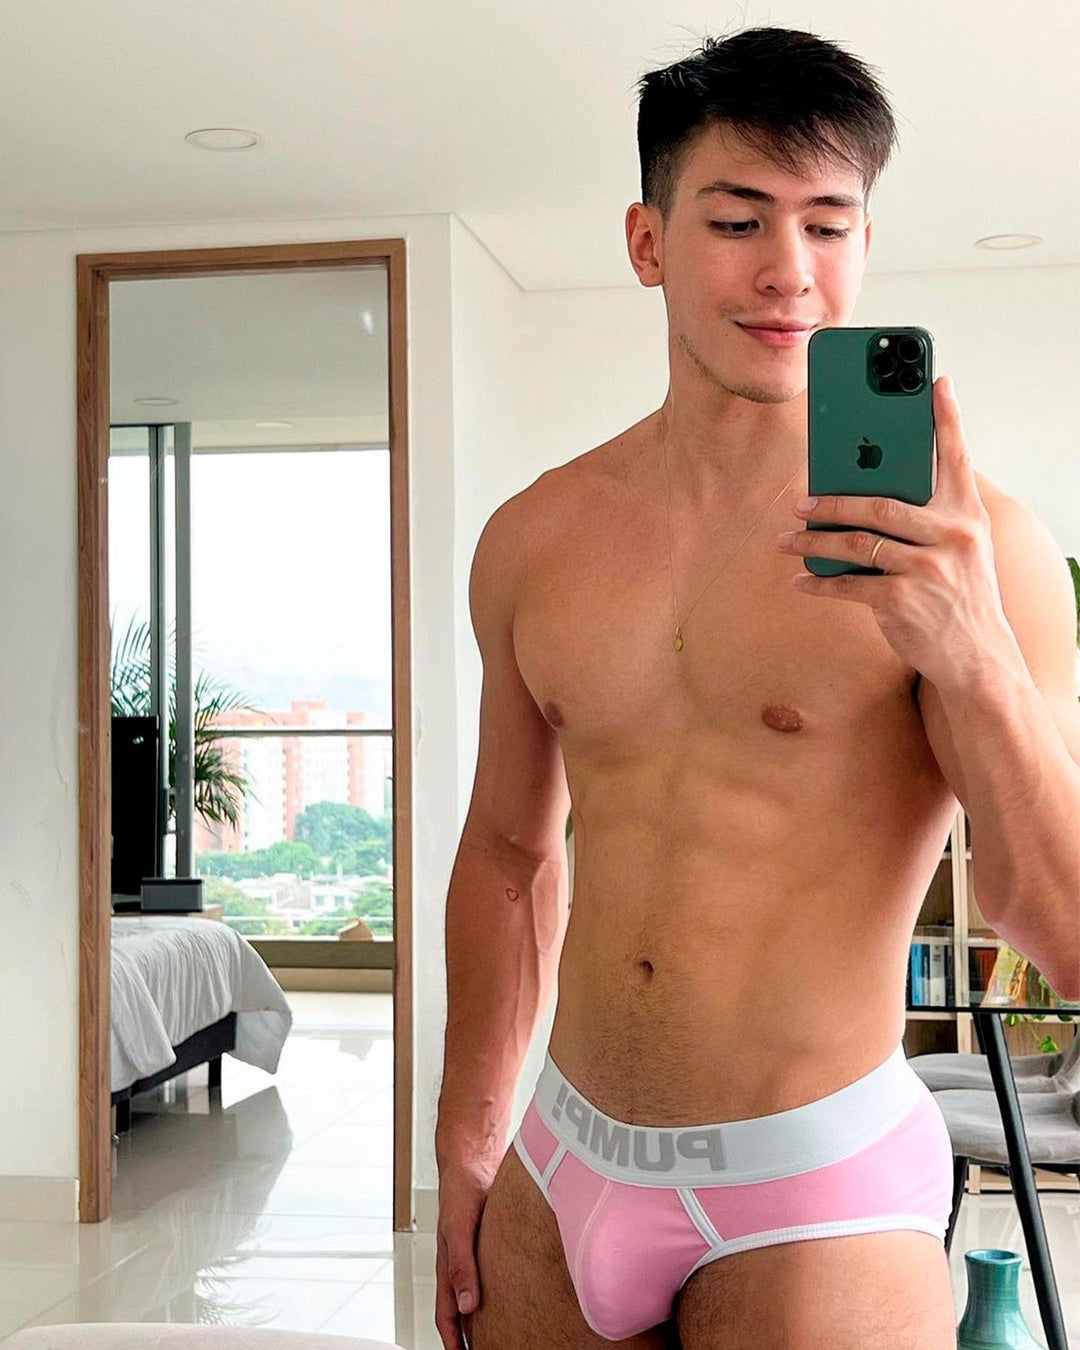 Bold and Confident: Embrace Your Style with Prince Wear's Sexy Jock Straps Collection